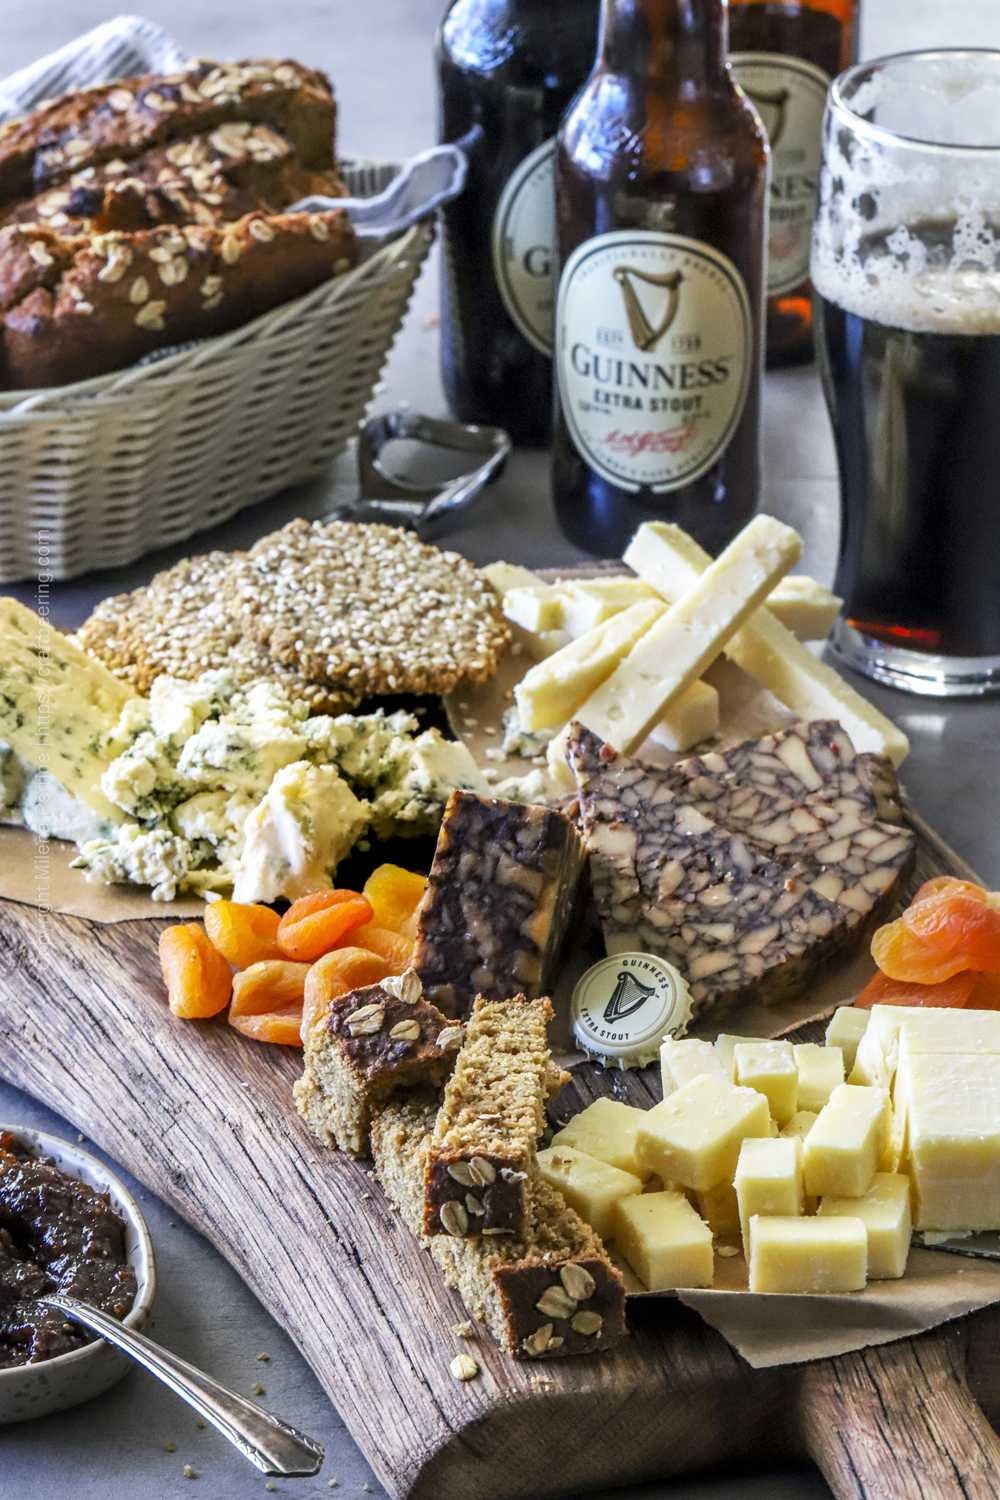 Irish cheese board with oatcakes and Guinness brown bread in addition to a genuine cheese selection, dried apricots and fig chutney.